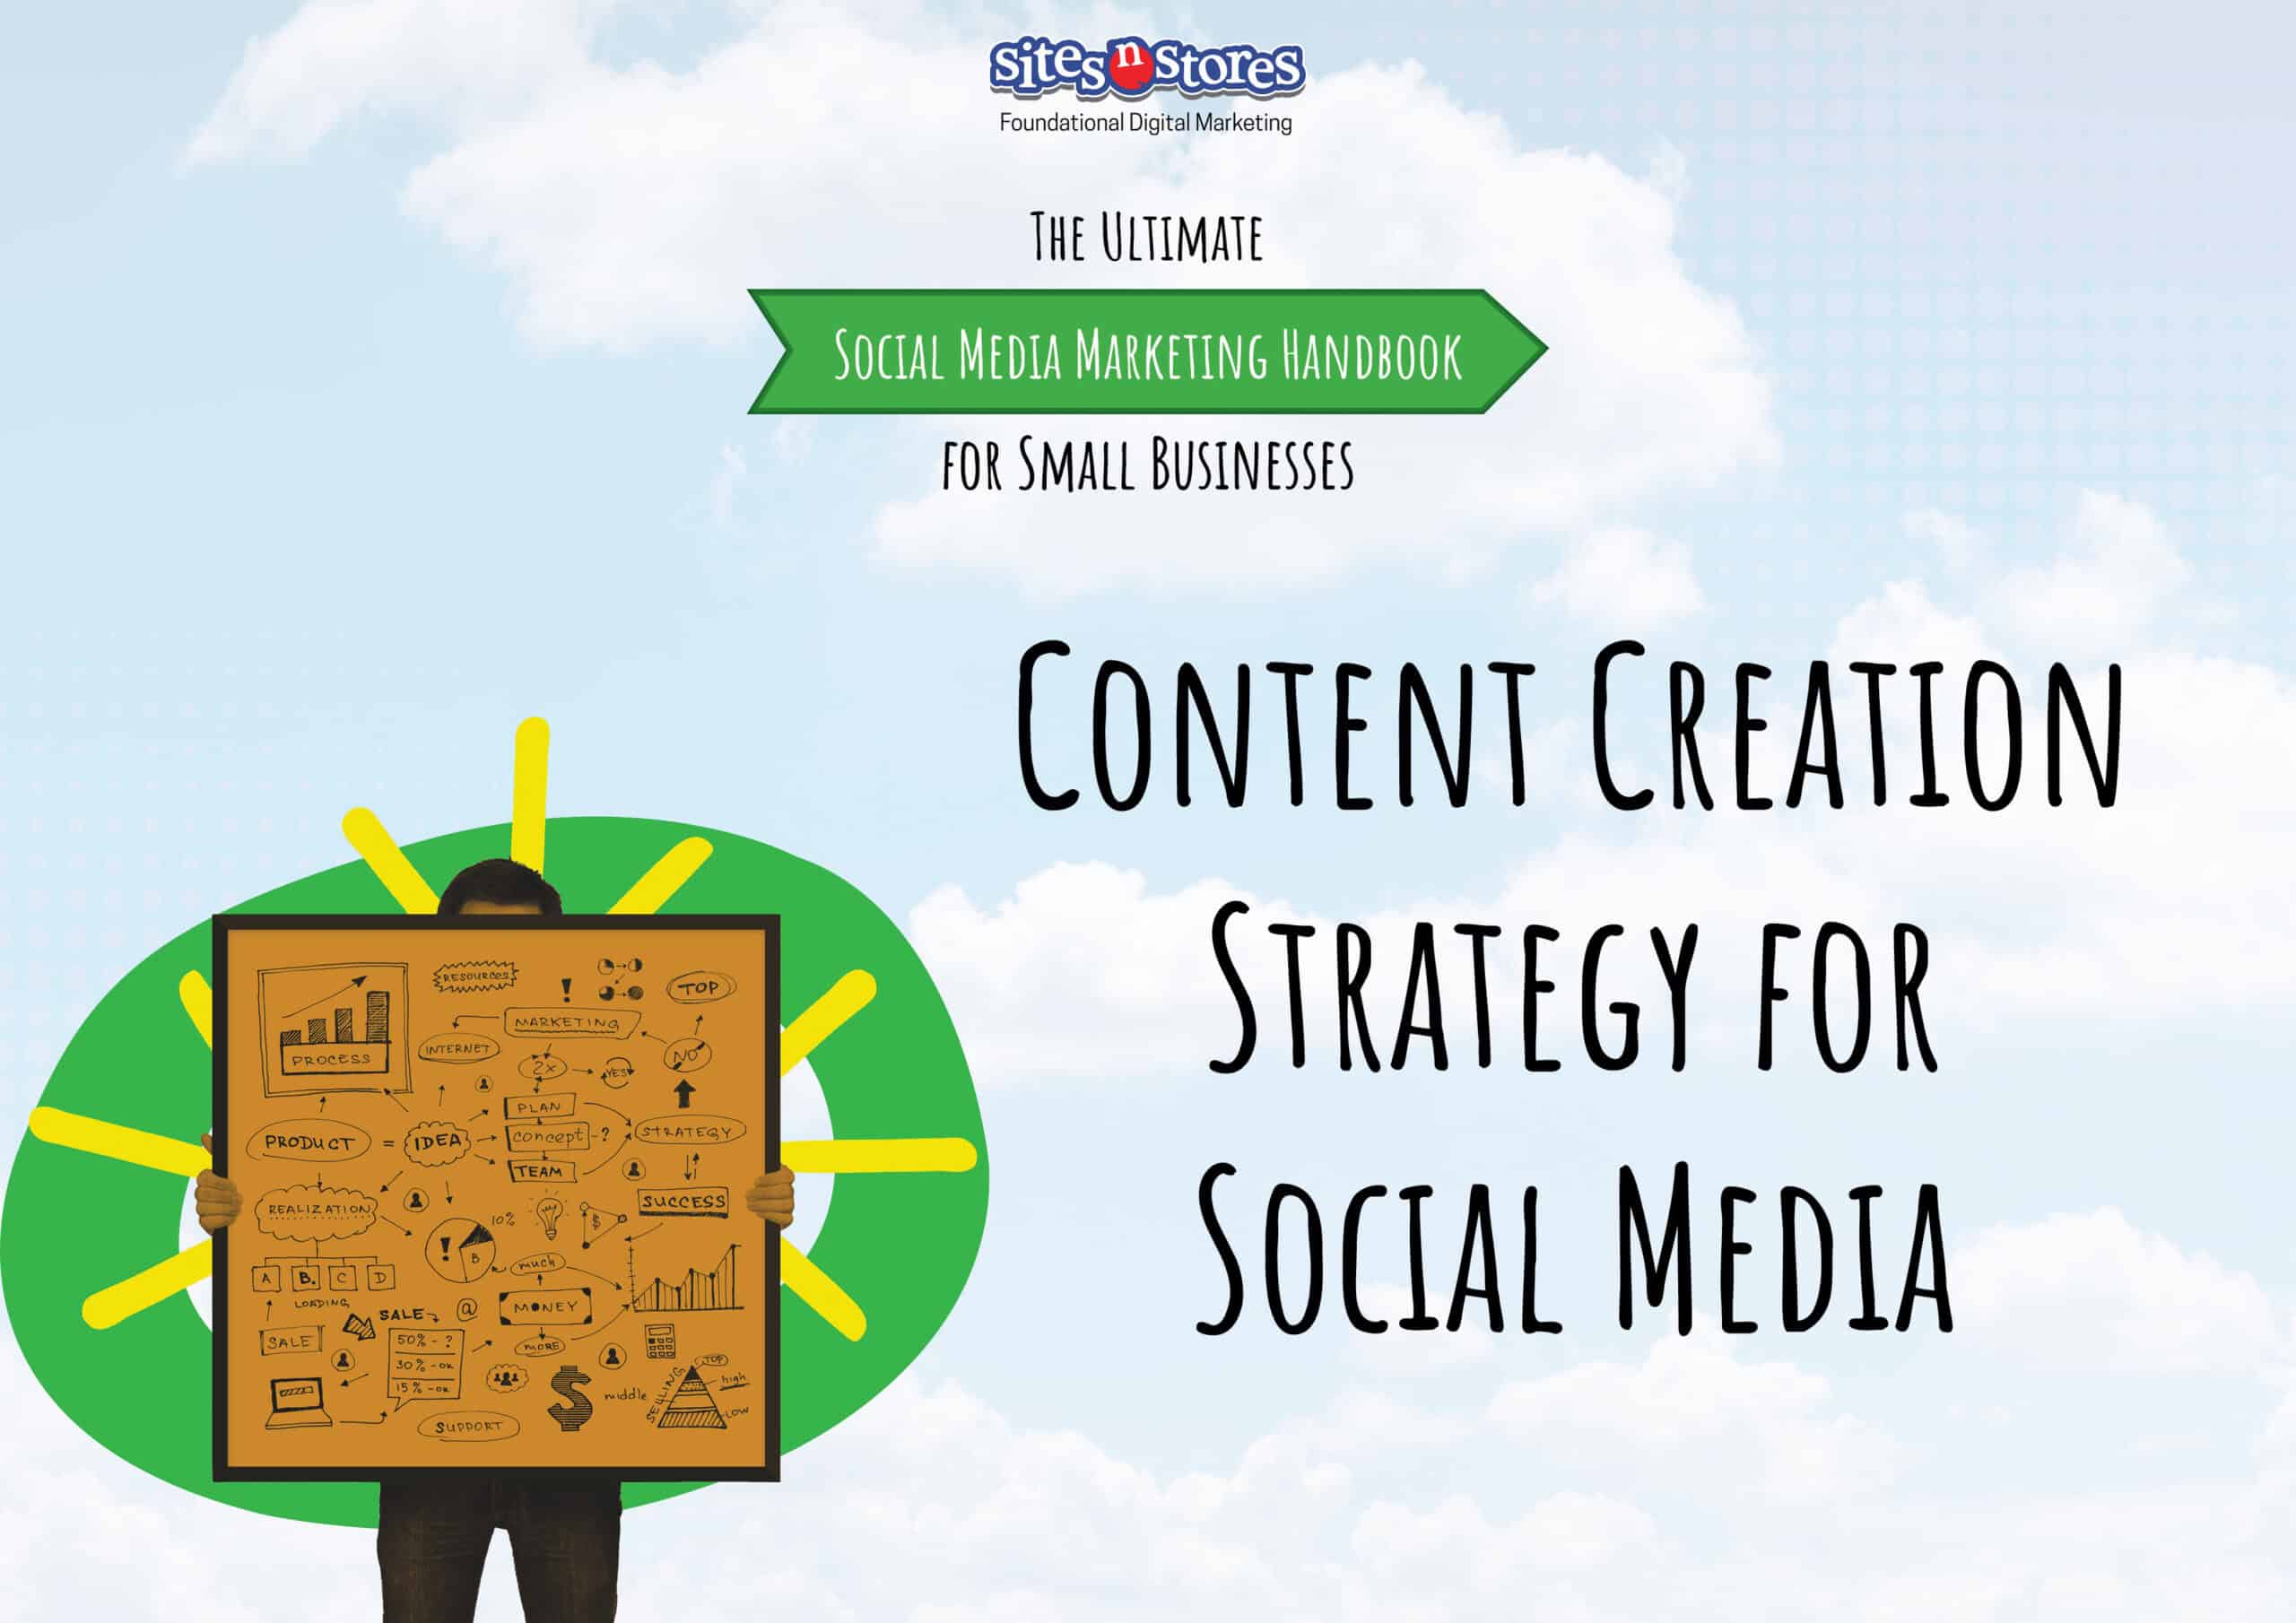 Content Creation Strategy for Social Media